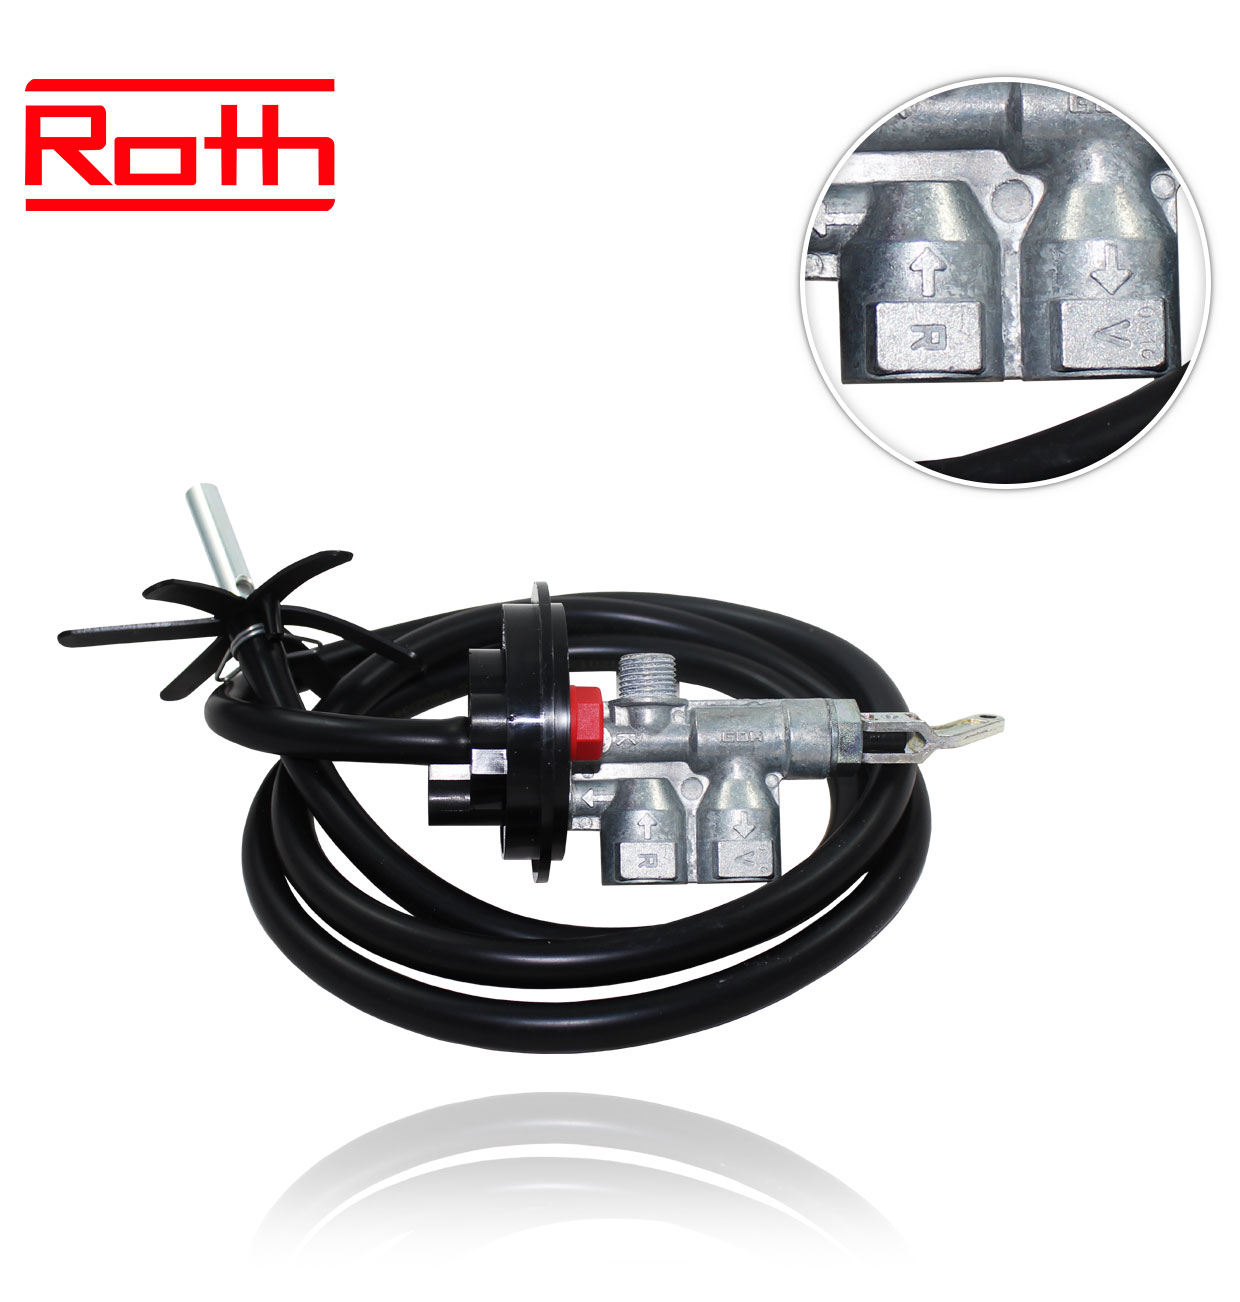 KIT-1 ROTH GAS OIL SUCTION UNIT